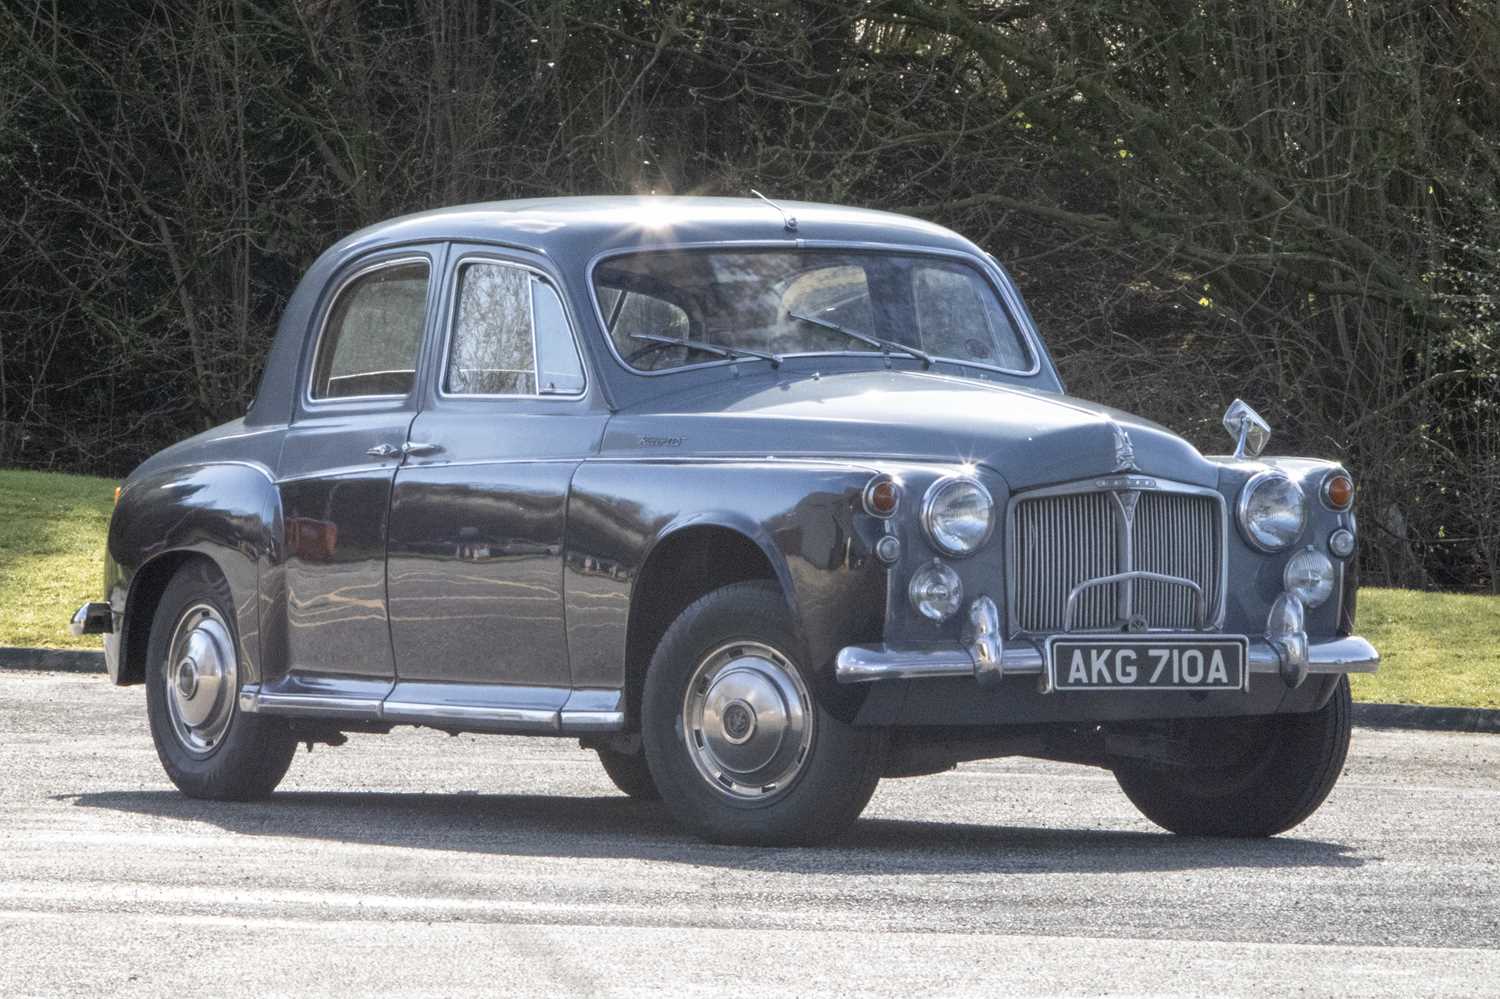 Lot 59 1963 Rover P4 110 Saloon